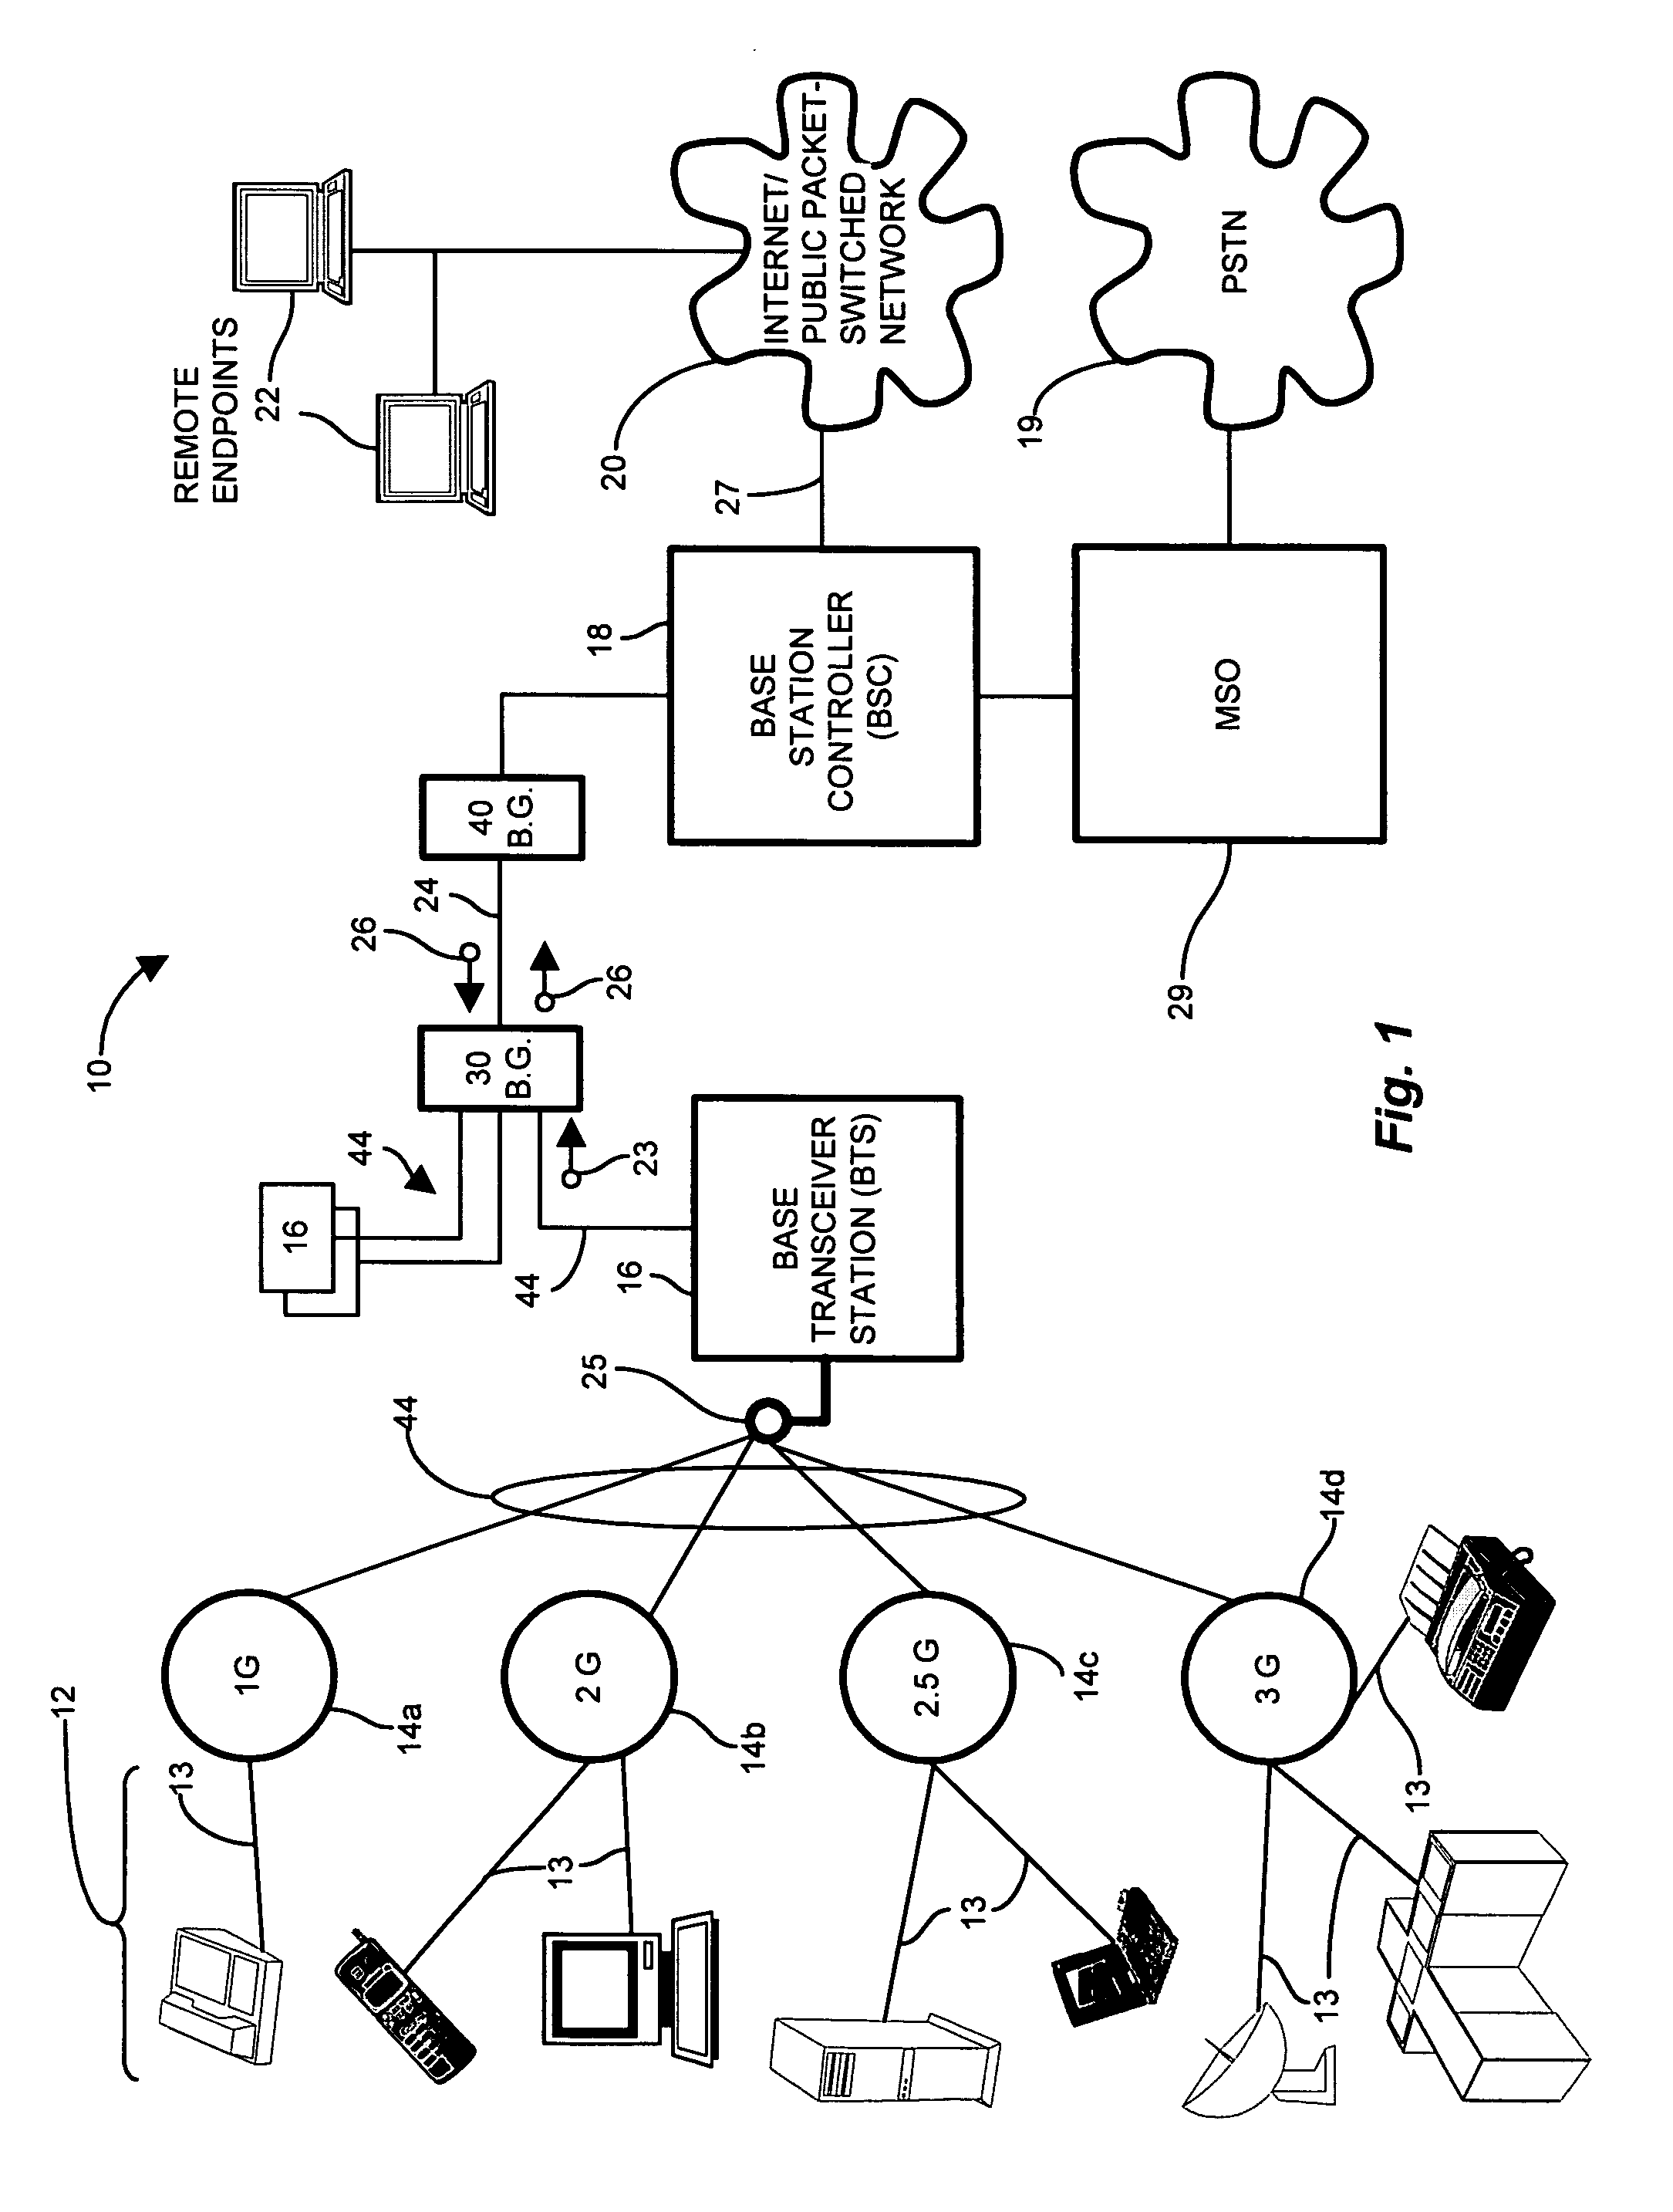 Methods and apparatus for network signal aggregation and bandwidth reduction